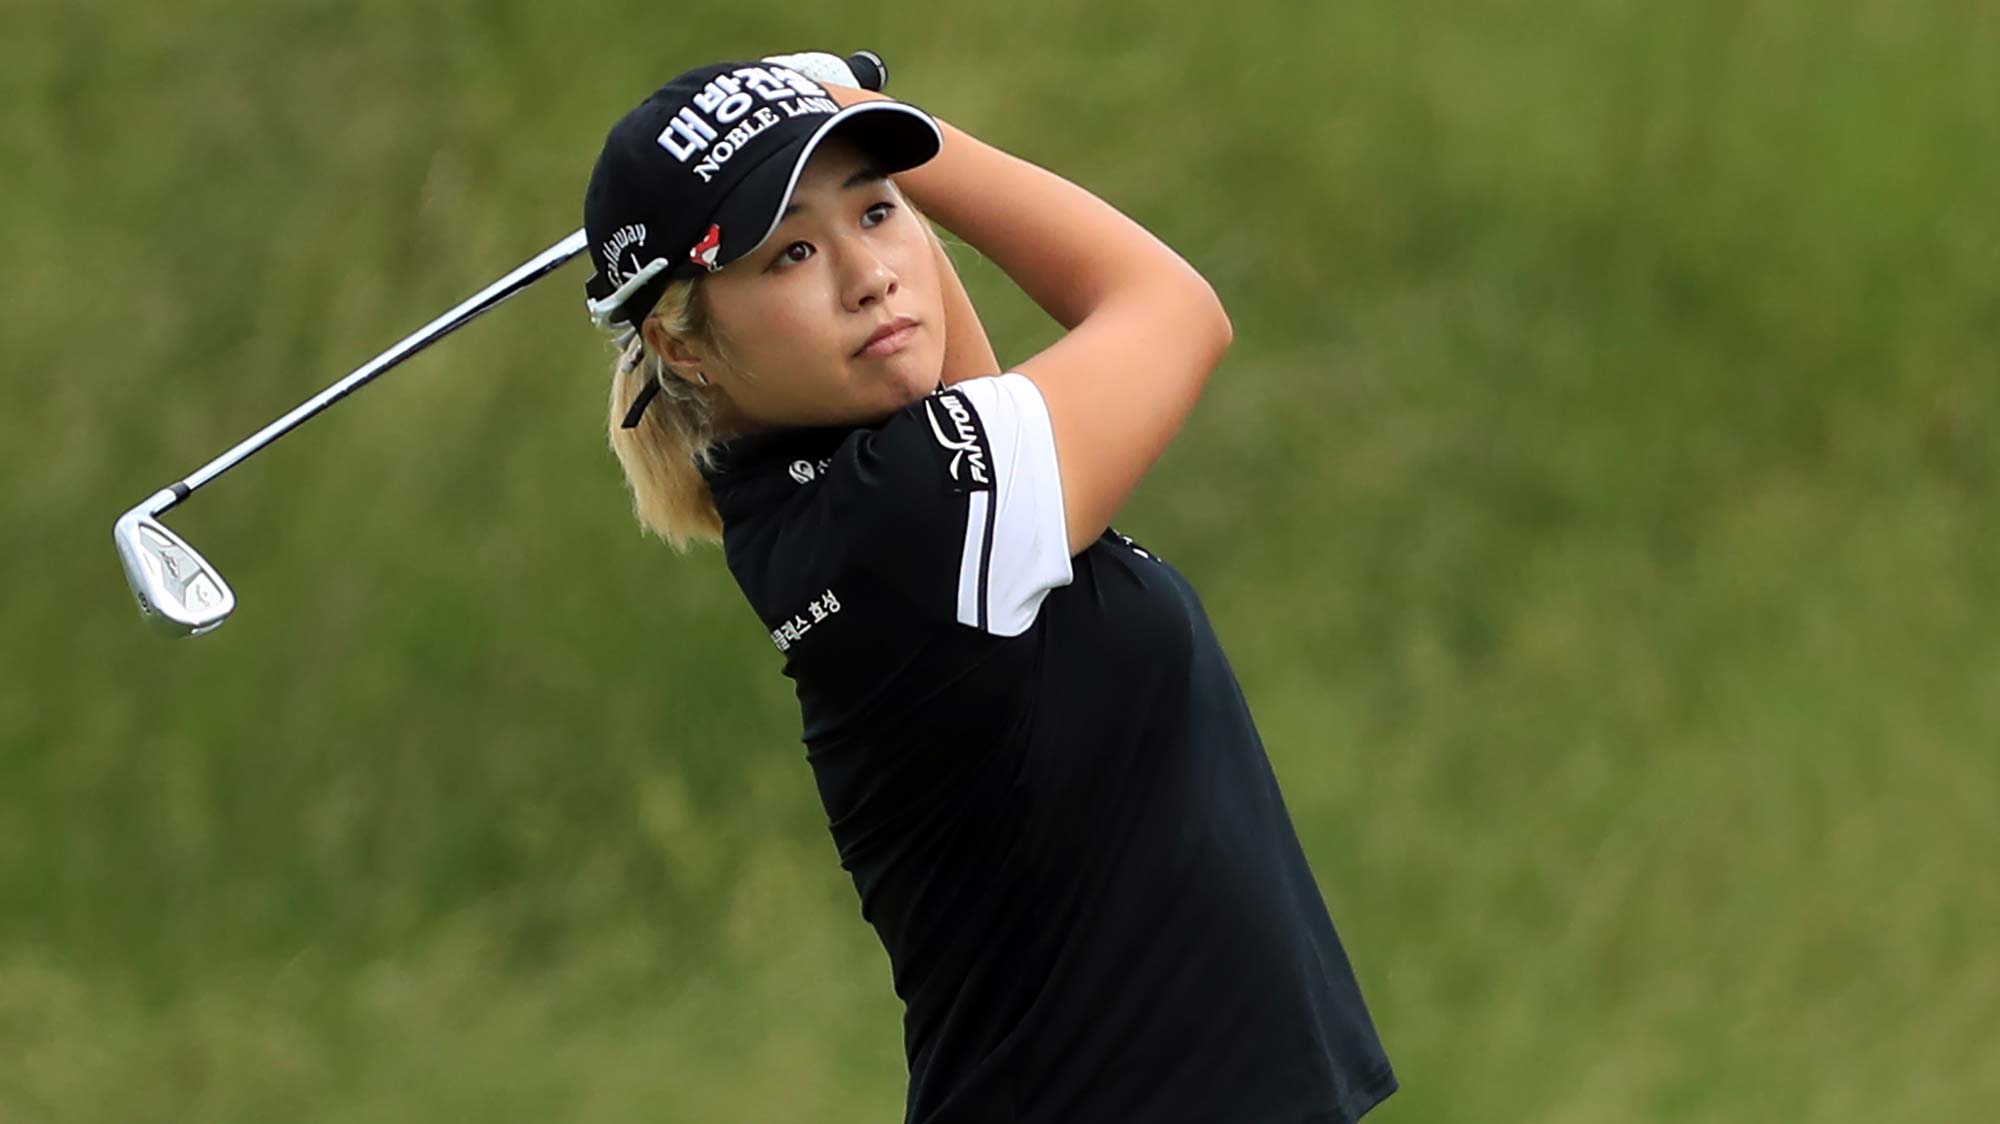 Jeongeun Lee6 of the Republic of Korea hits her second shot on the third hole during the first round of the ShopRite LPGA Classic presented by Acer